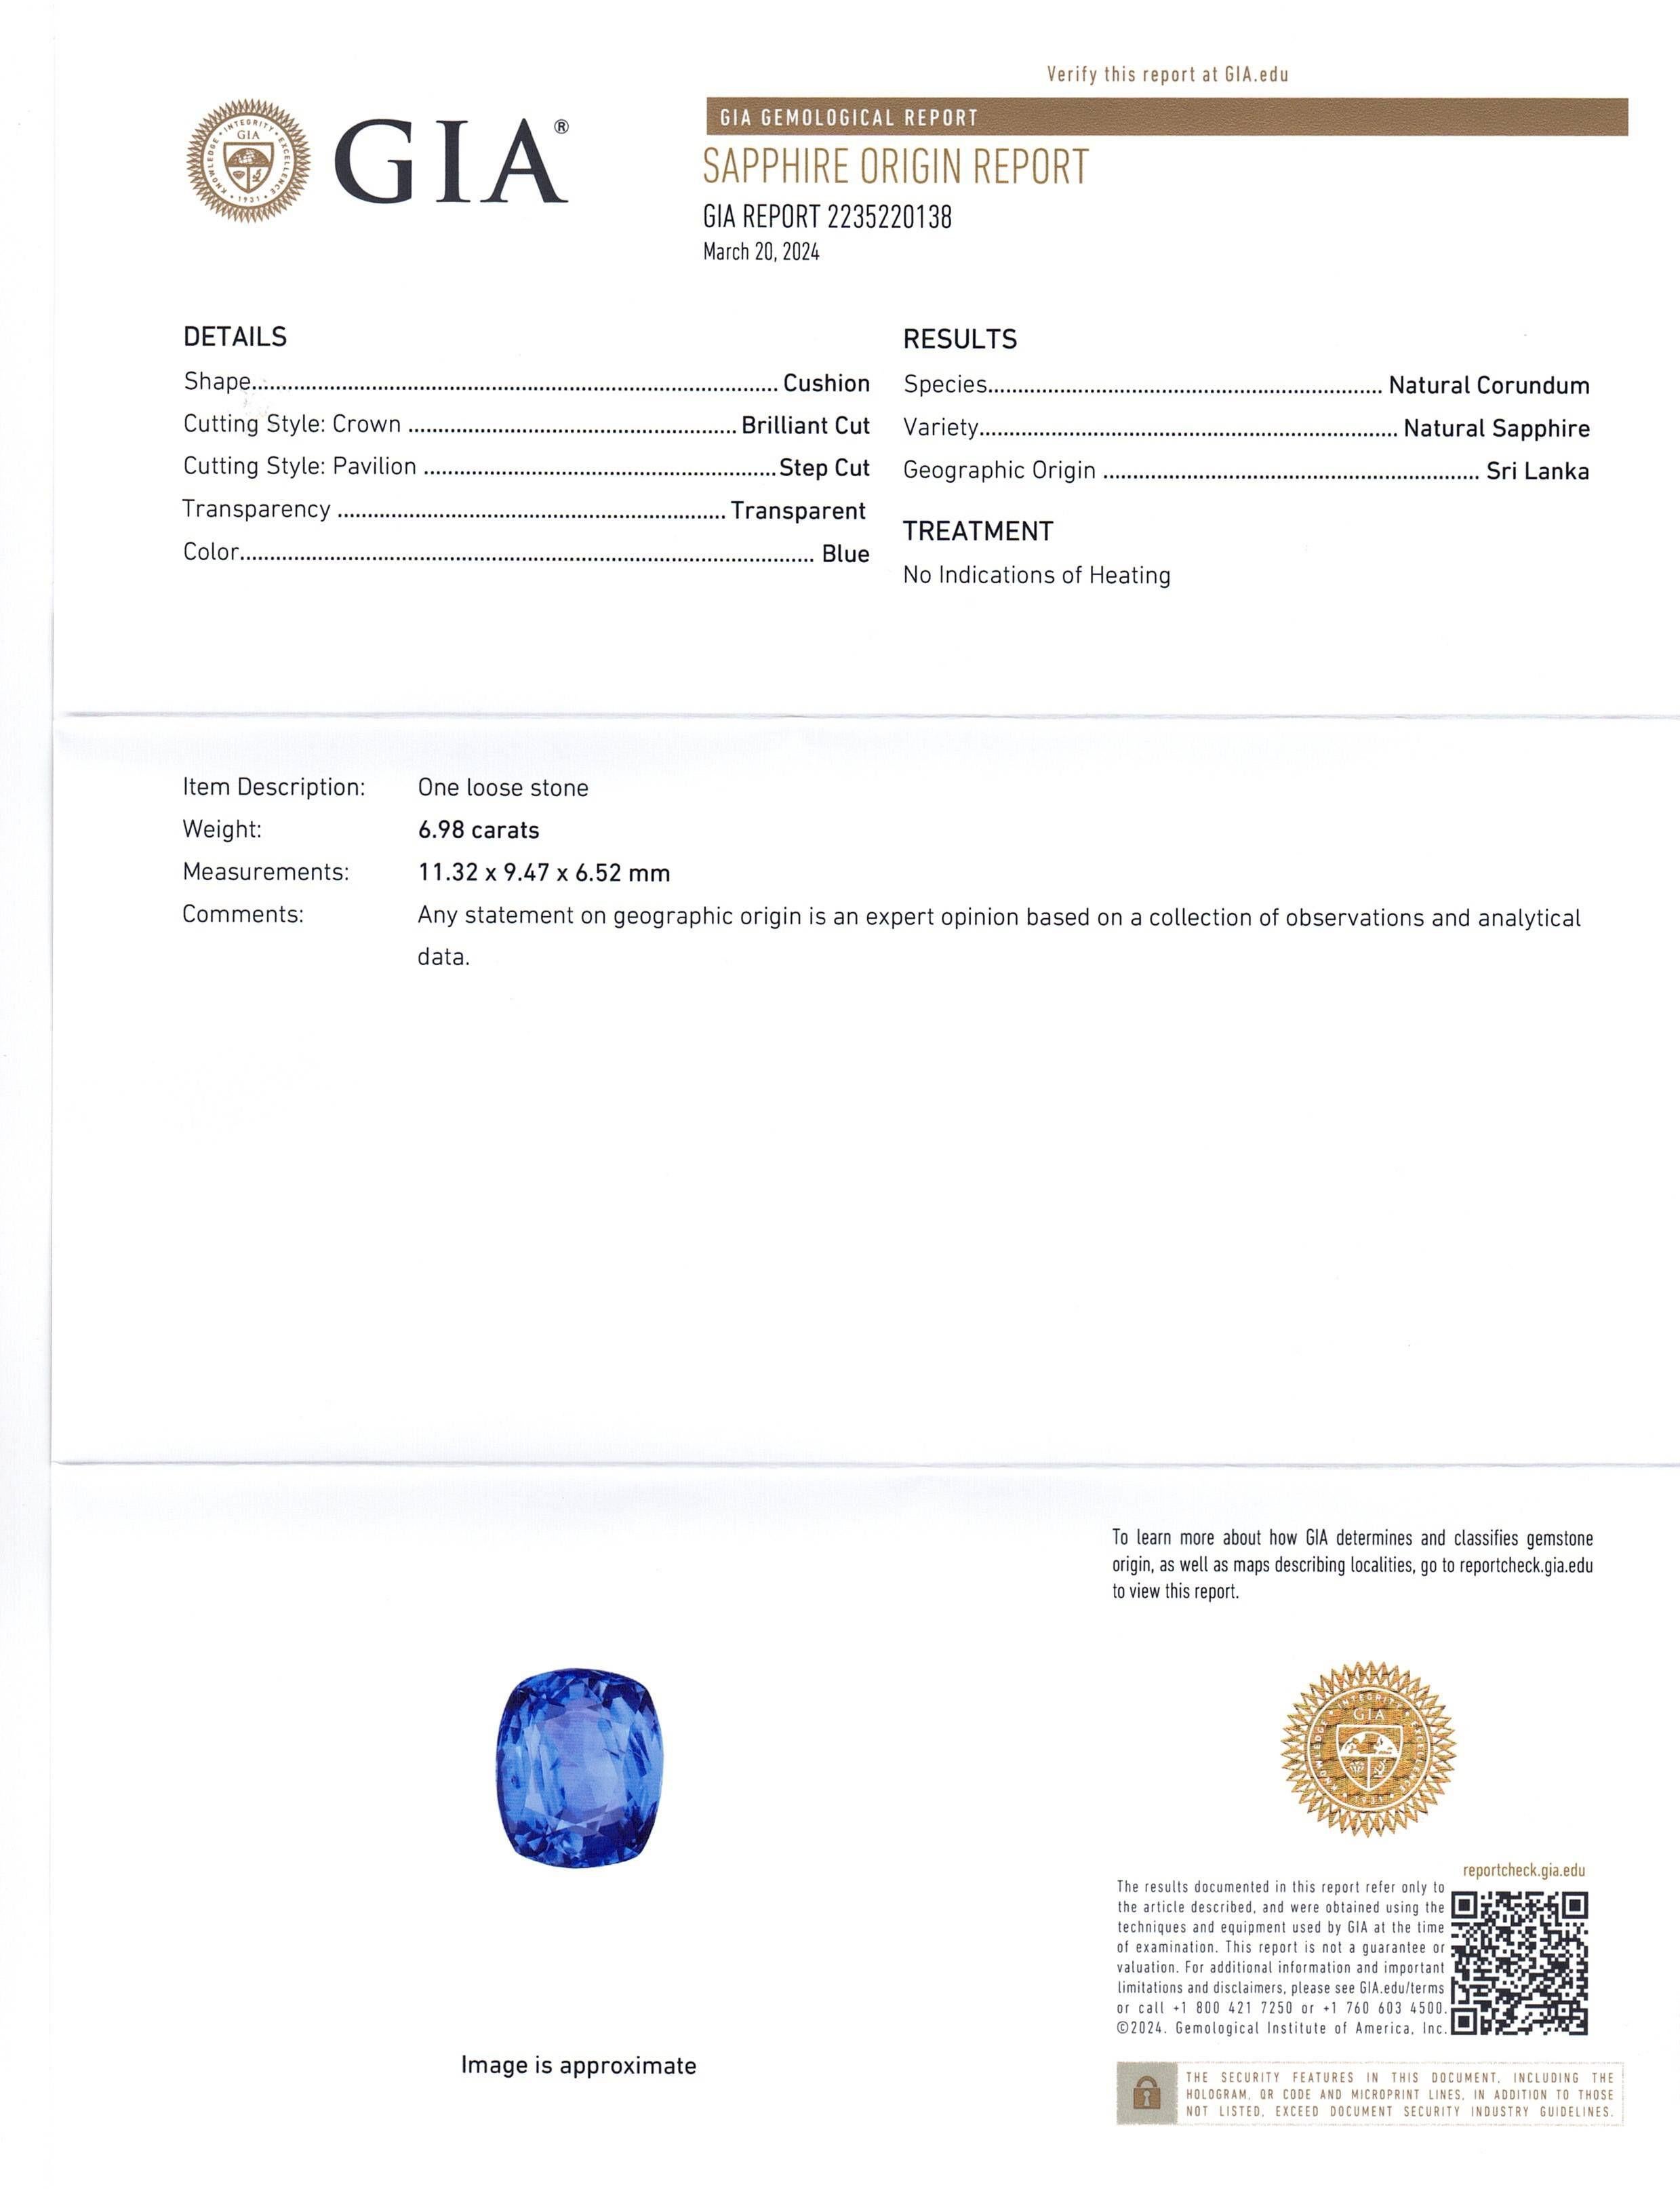 This is a stunning GIA Certified Sapphire 


The GIA report reads as follows:

GIA Report Number: 2235220138
Shape: Cushion
Cutting Style: 
Cutting Style: Crown: Brilliant Cut
Cutting Style: Pavilion: Step Cut
Transparency: Transparent
Colour: